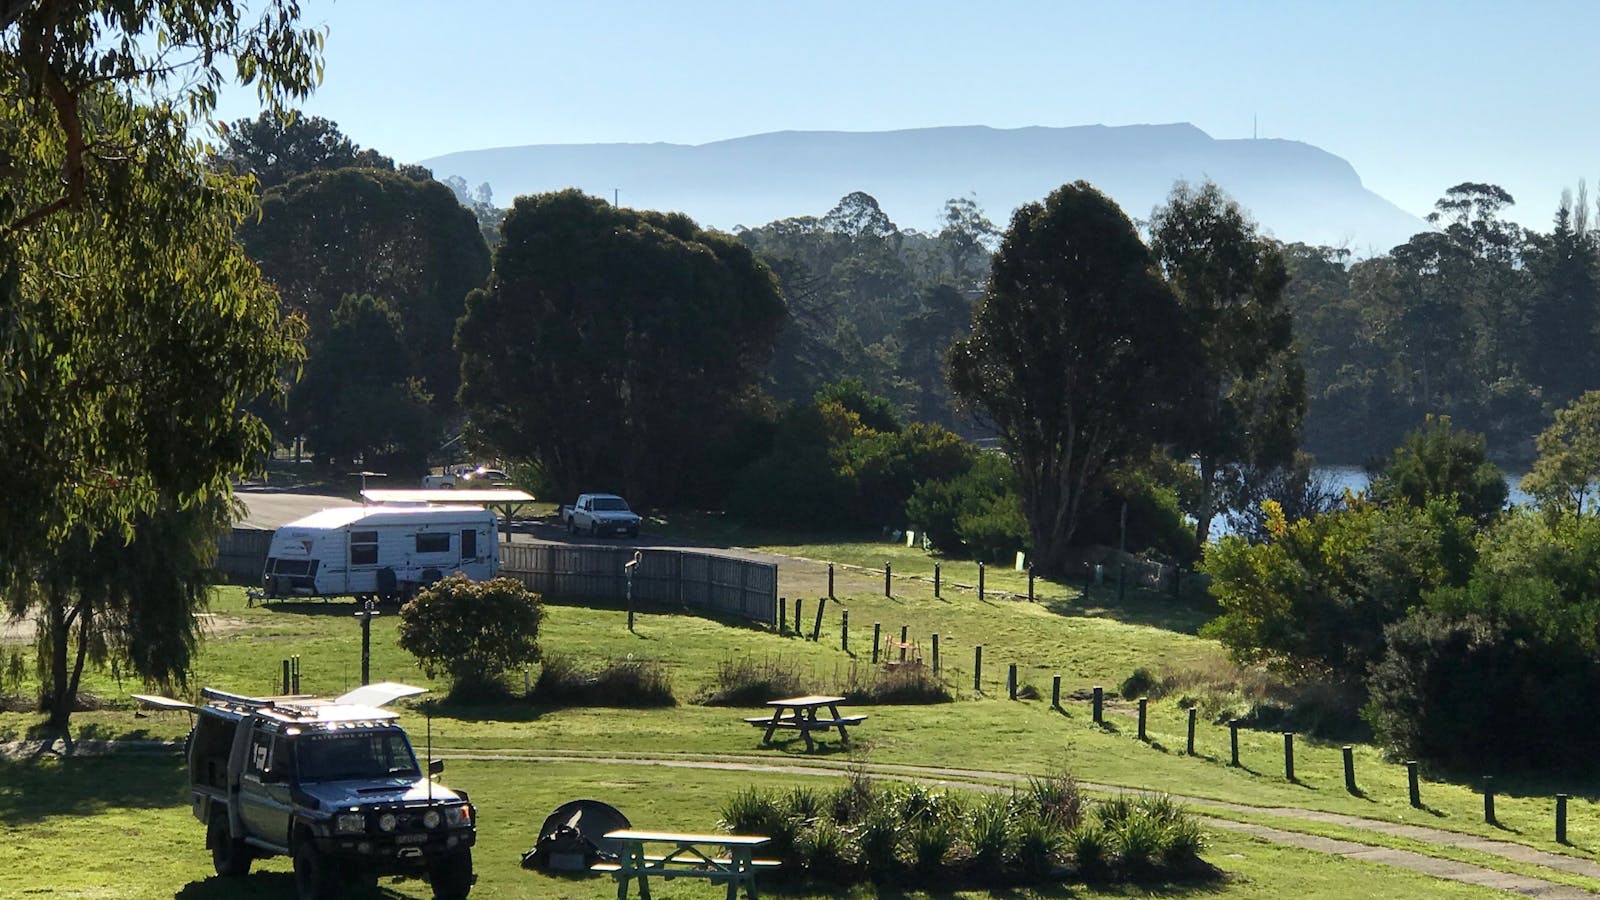 View over the camp sites of Mt Wellington